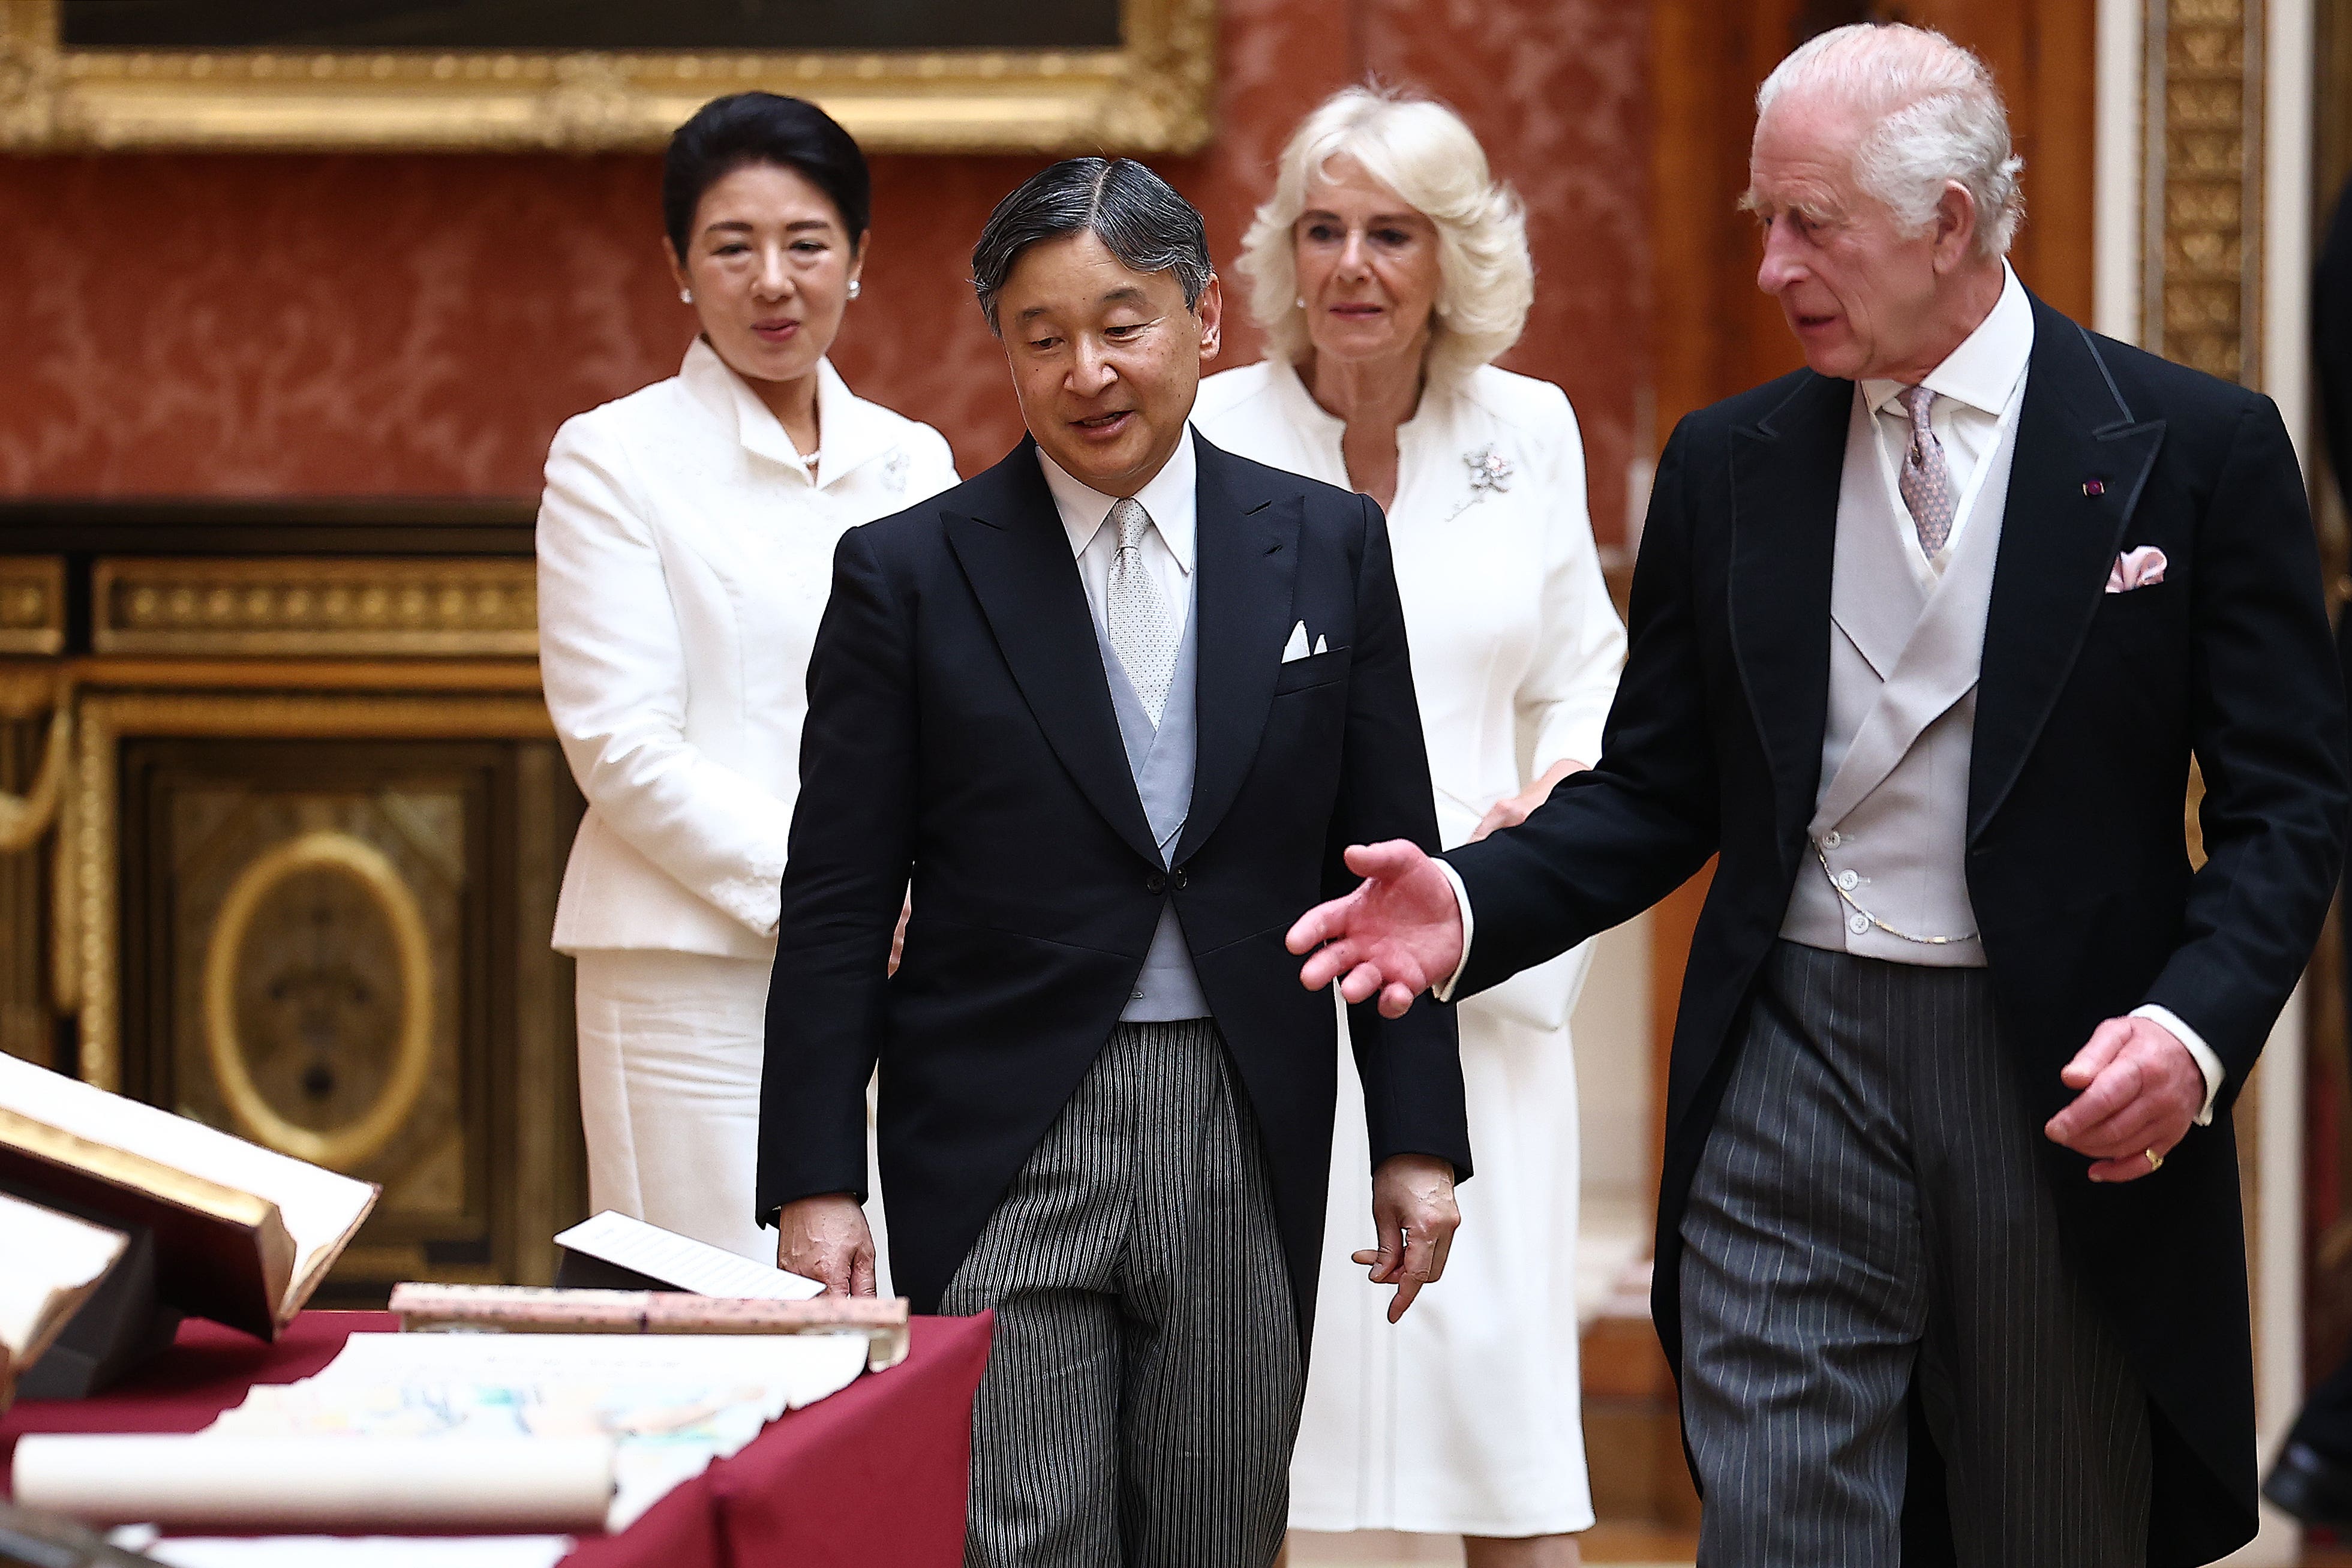 King Charles and Queen Camilla show Japan’s Emperor Naruhito and Empress Masako around Buckingham Palace (Henry Nicholls/PA)